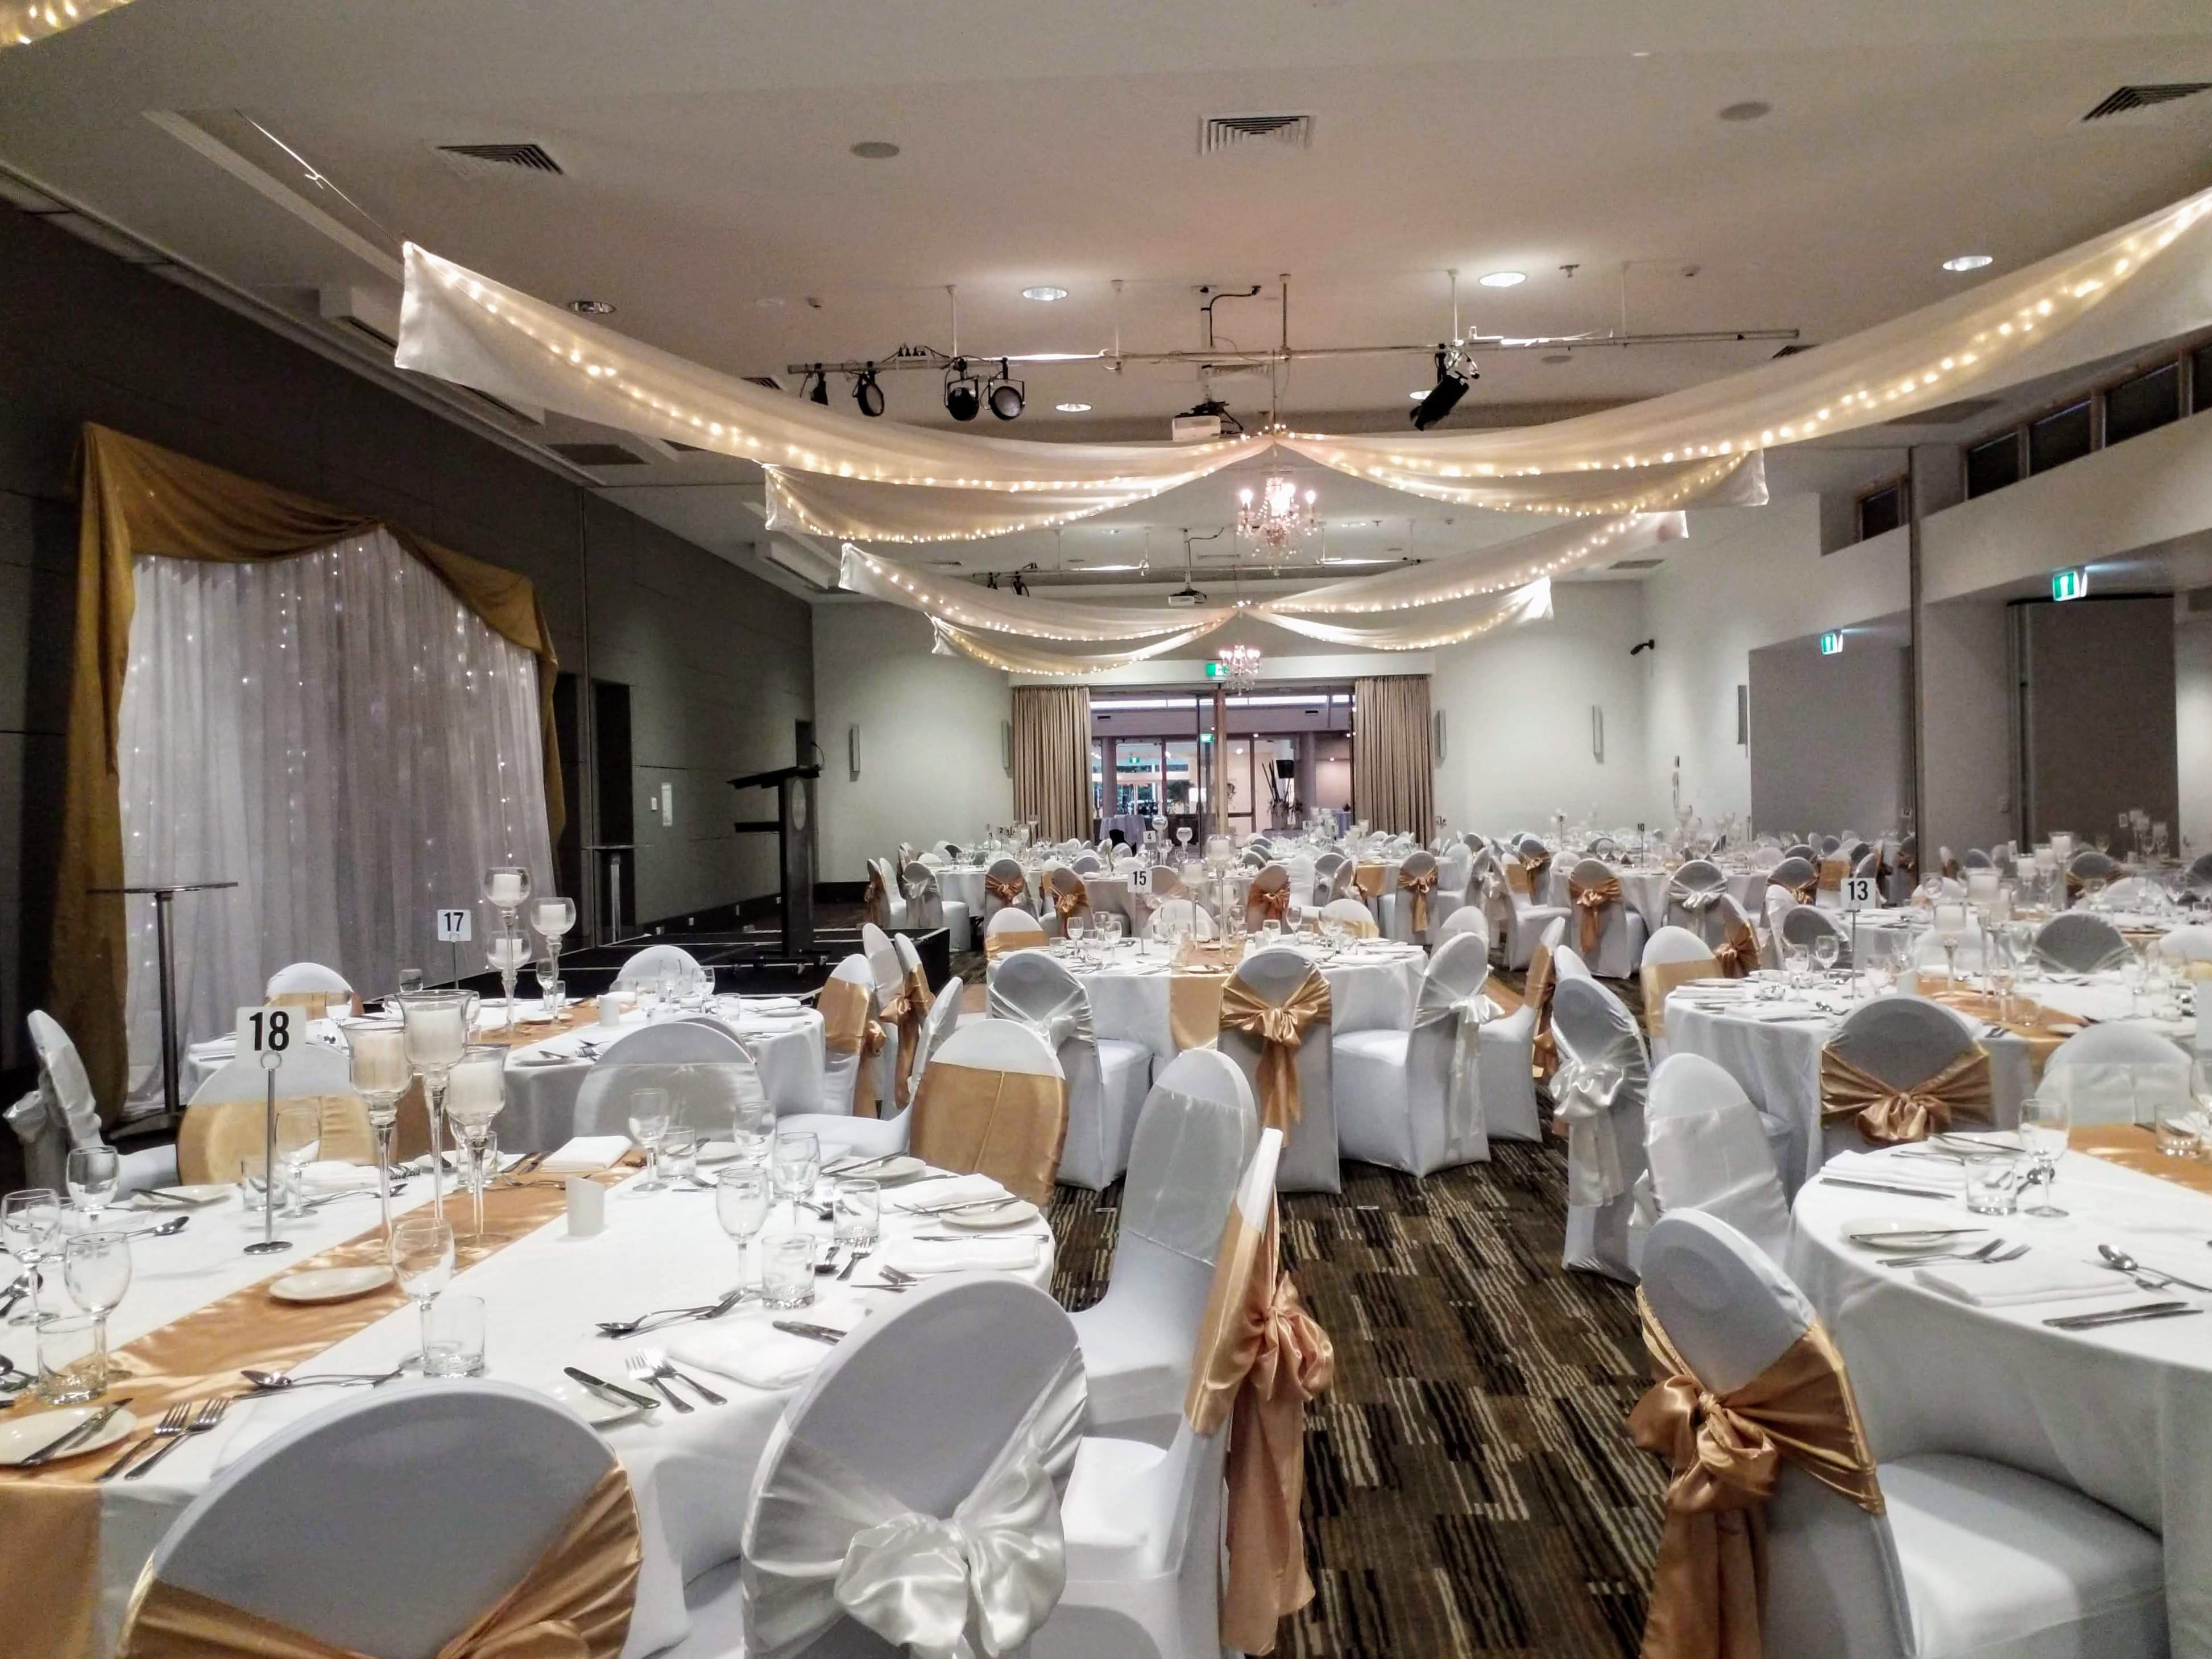 Star ceiling canopy crystal chandeliers chair covers gold bows Pacific Bay Resort